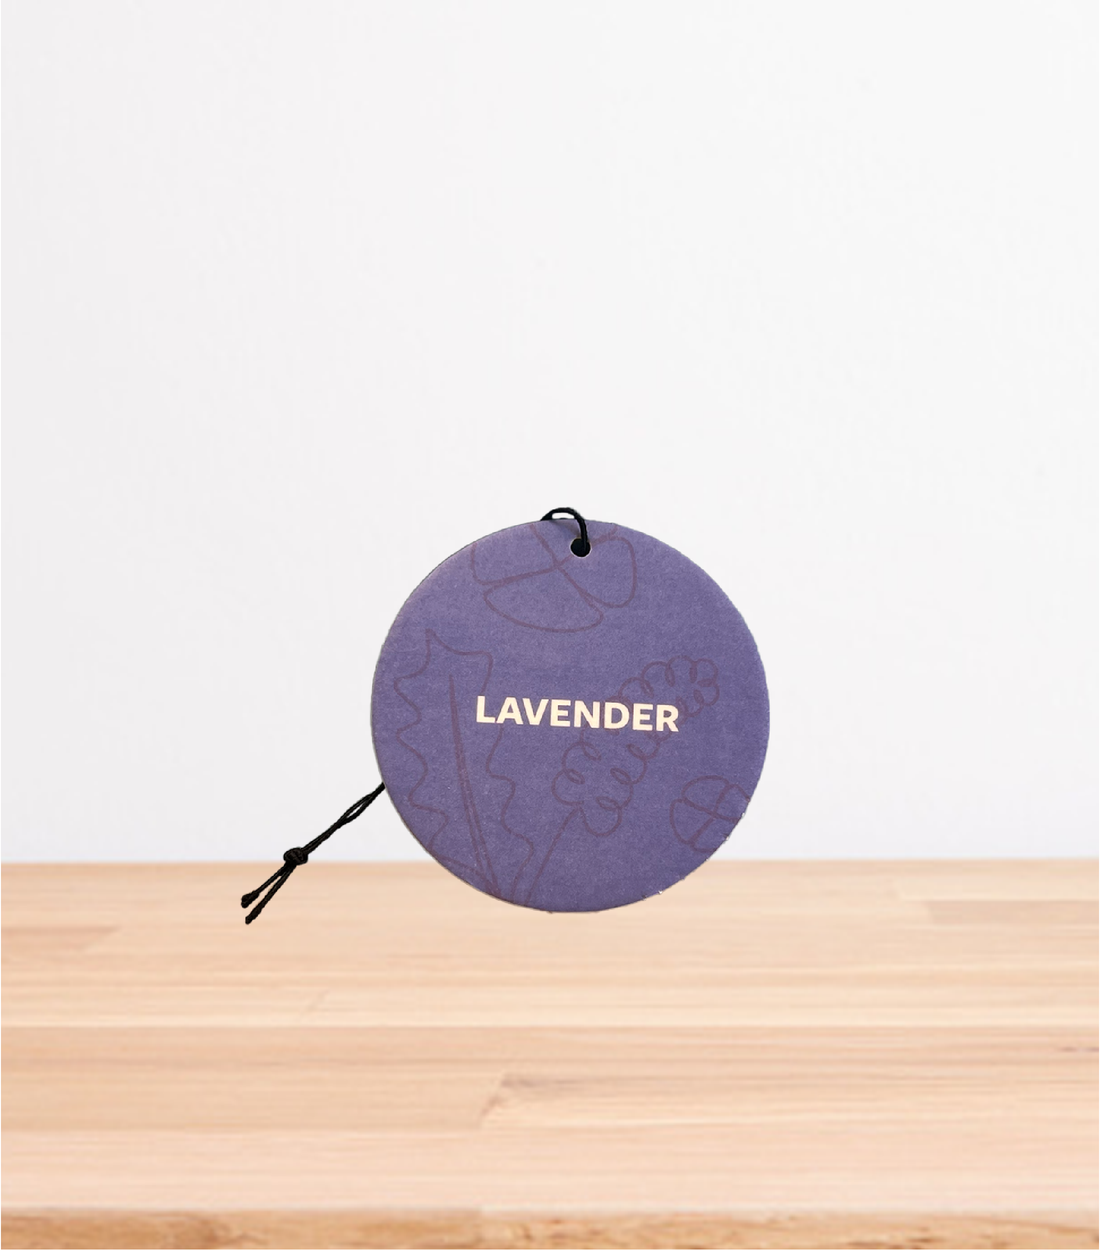 A Lavender car freshener on a wooden table